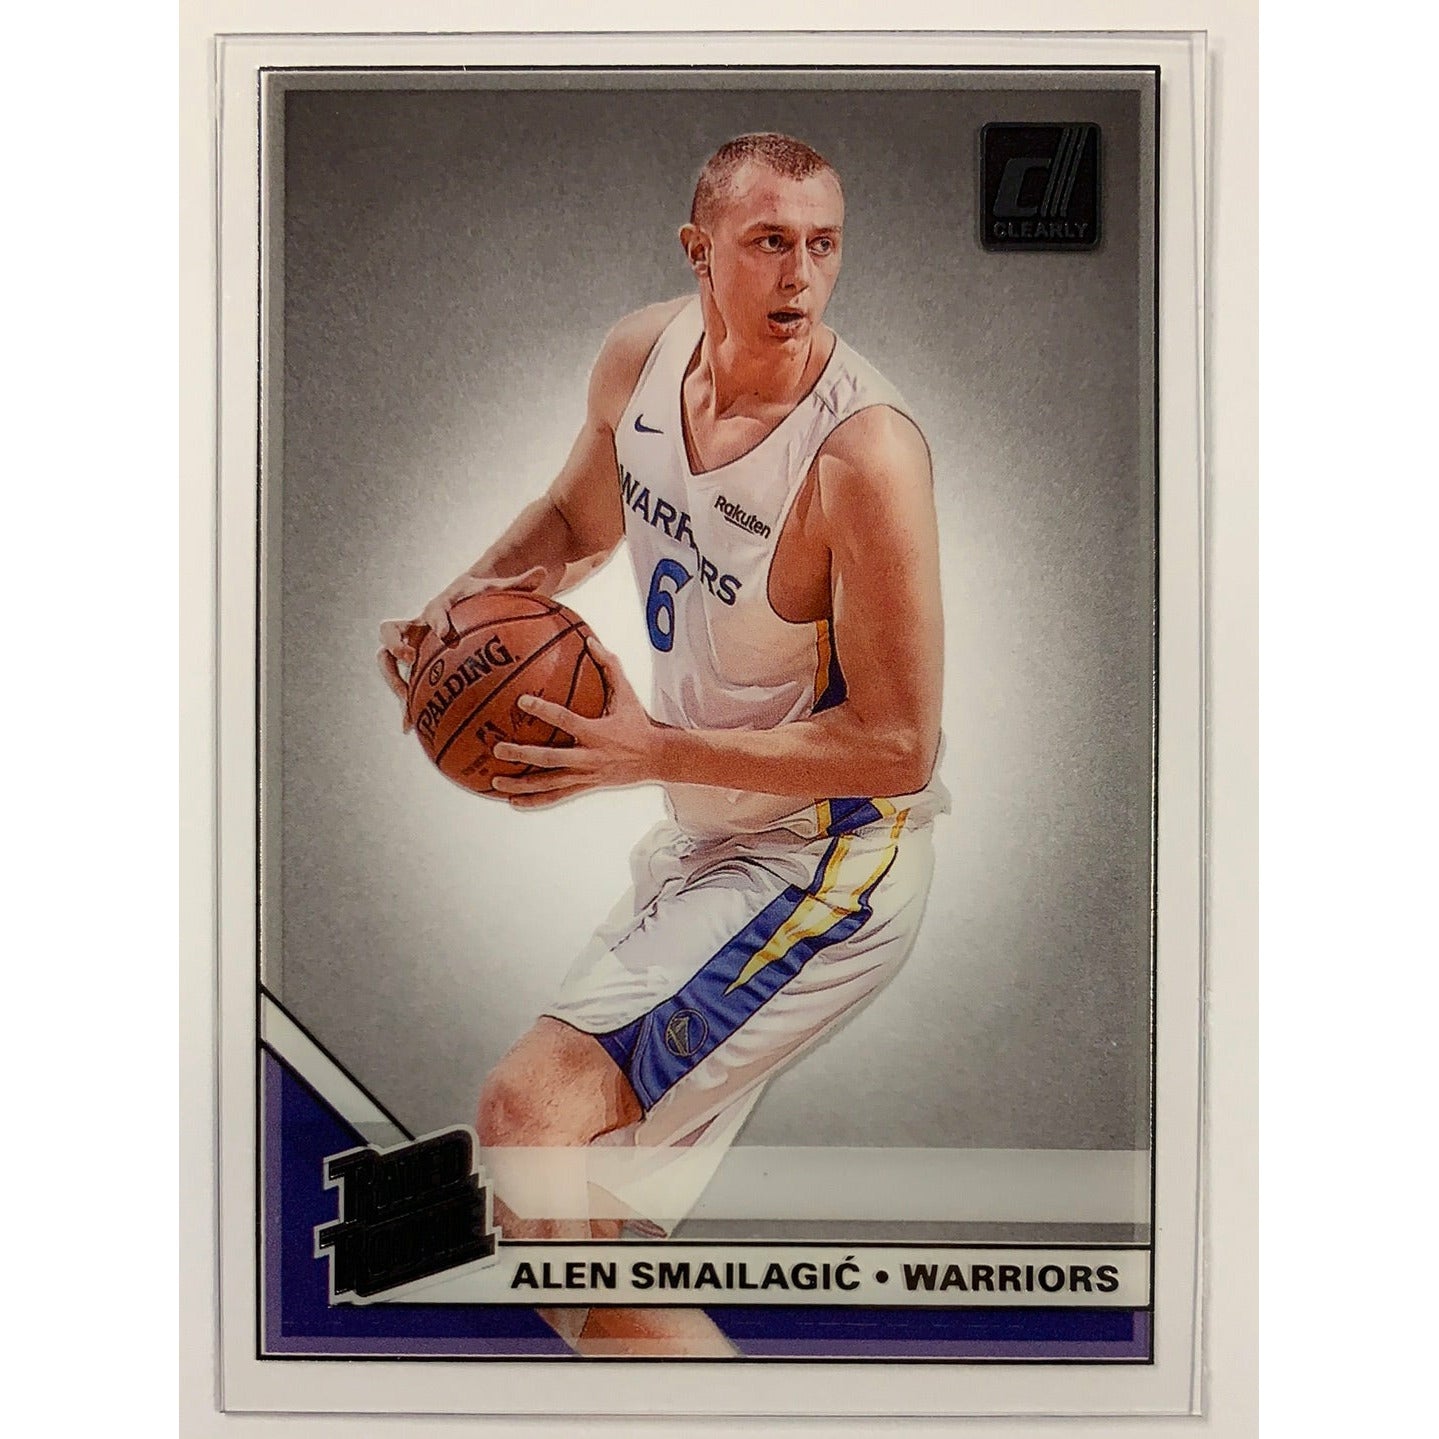  2019-20 Clearly Donruss Alen Smailagic Rated Rookie  Local Legends Cards & Collectibles